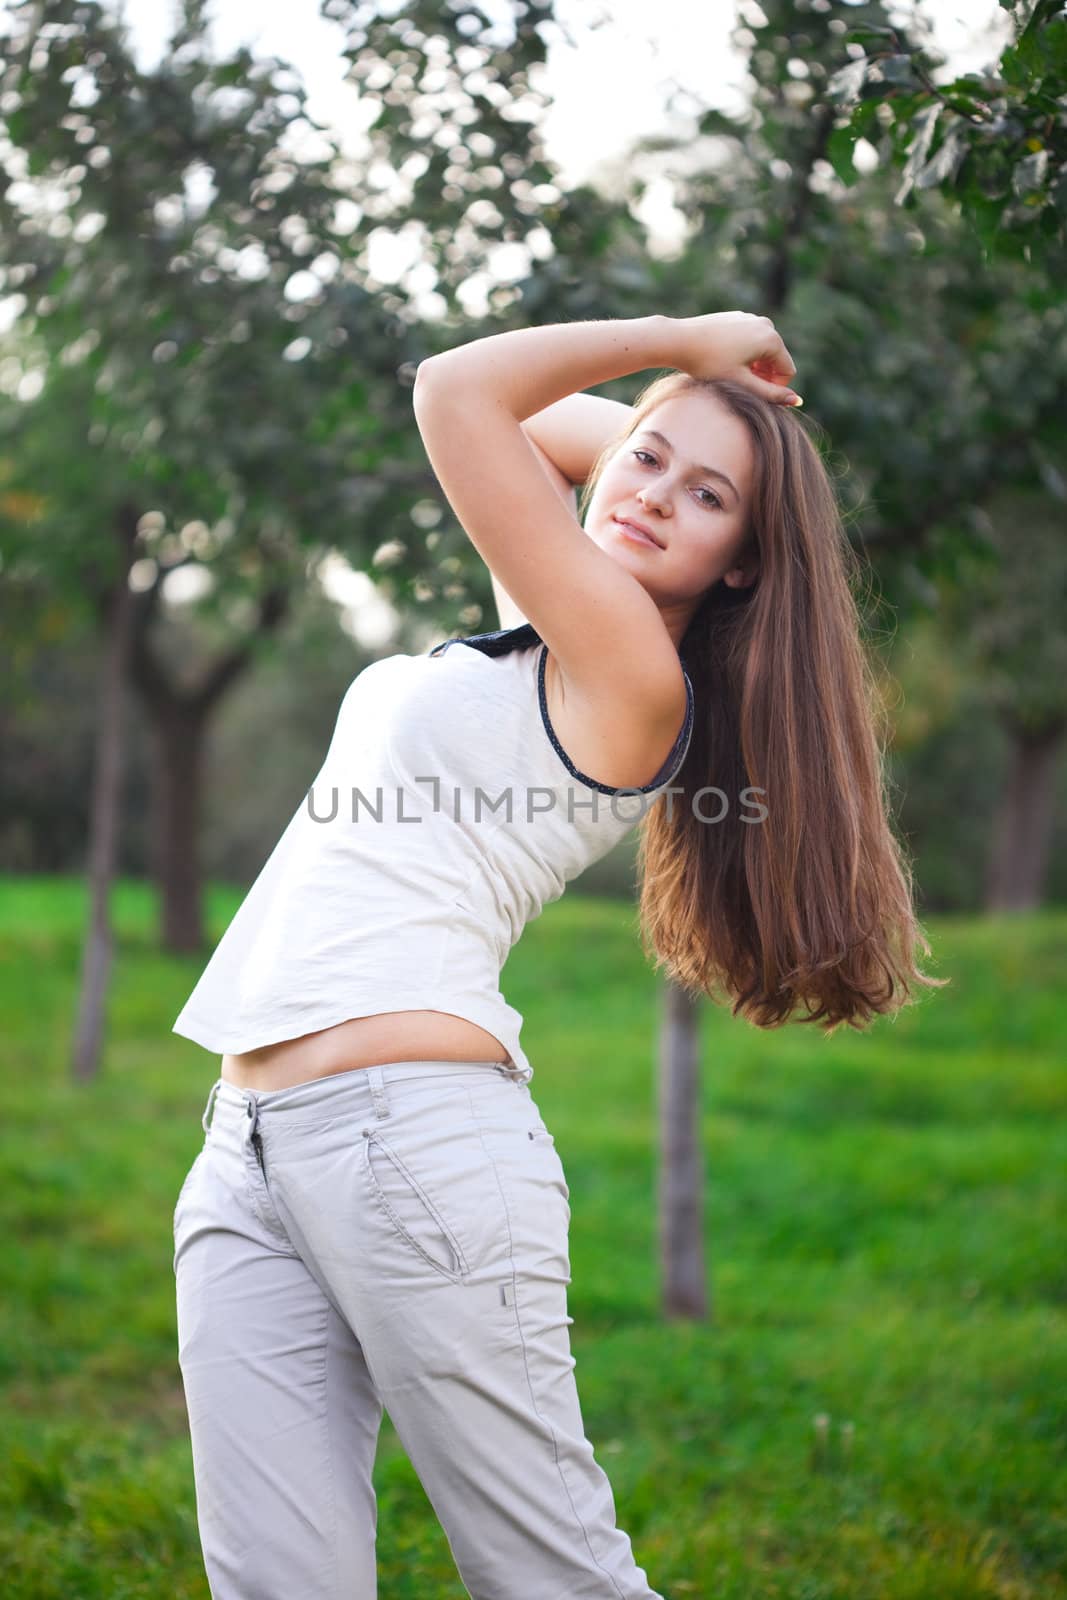 beautiful young woman standing on green grass